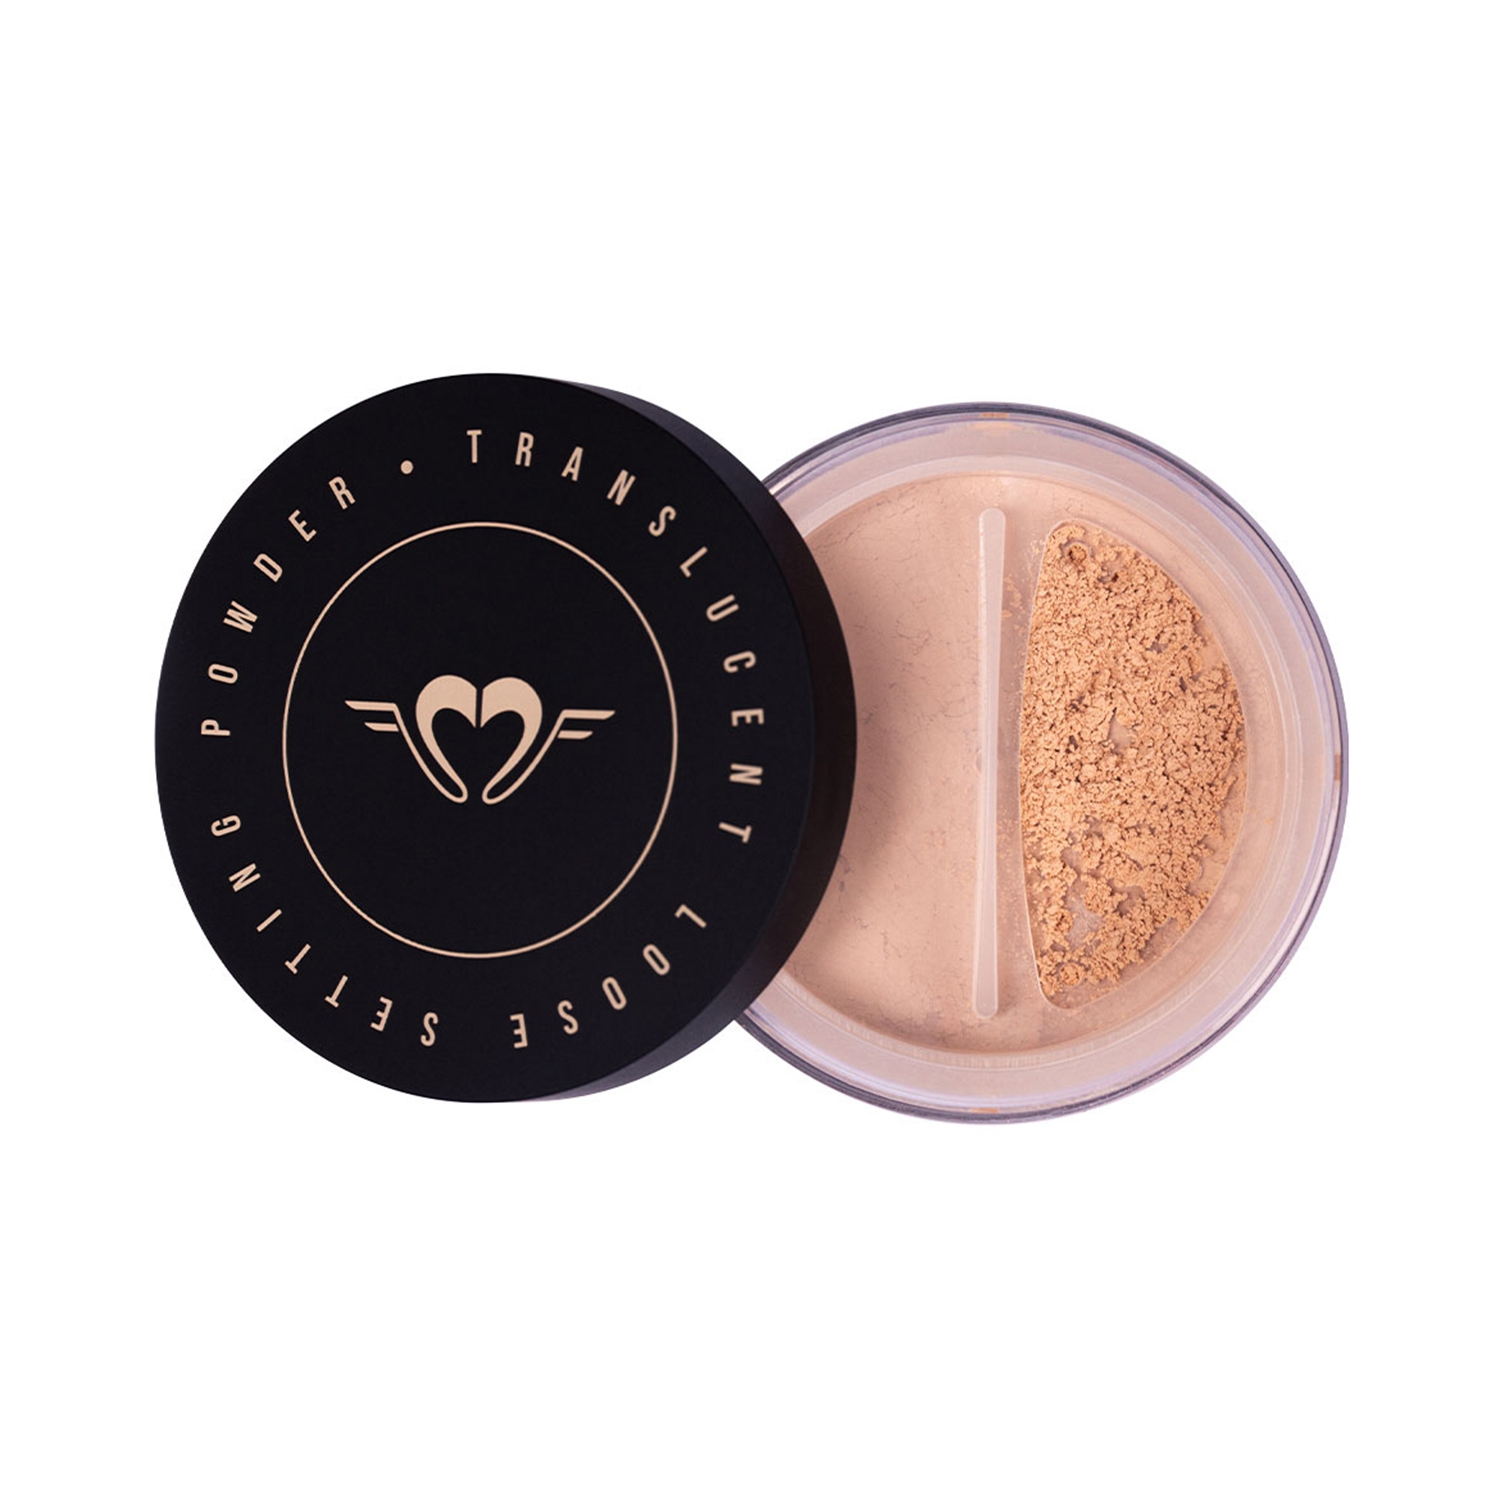 Daily Life Forever52 | Daily Life Forever52 Translucent Loose Setting Powder TLM010 - Buff Beige (7g)